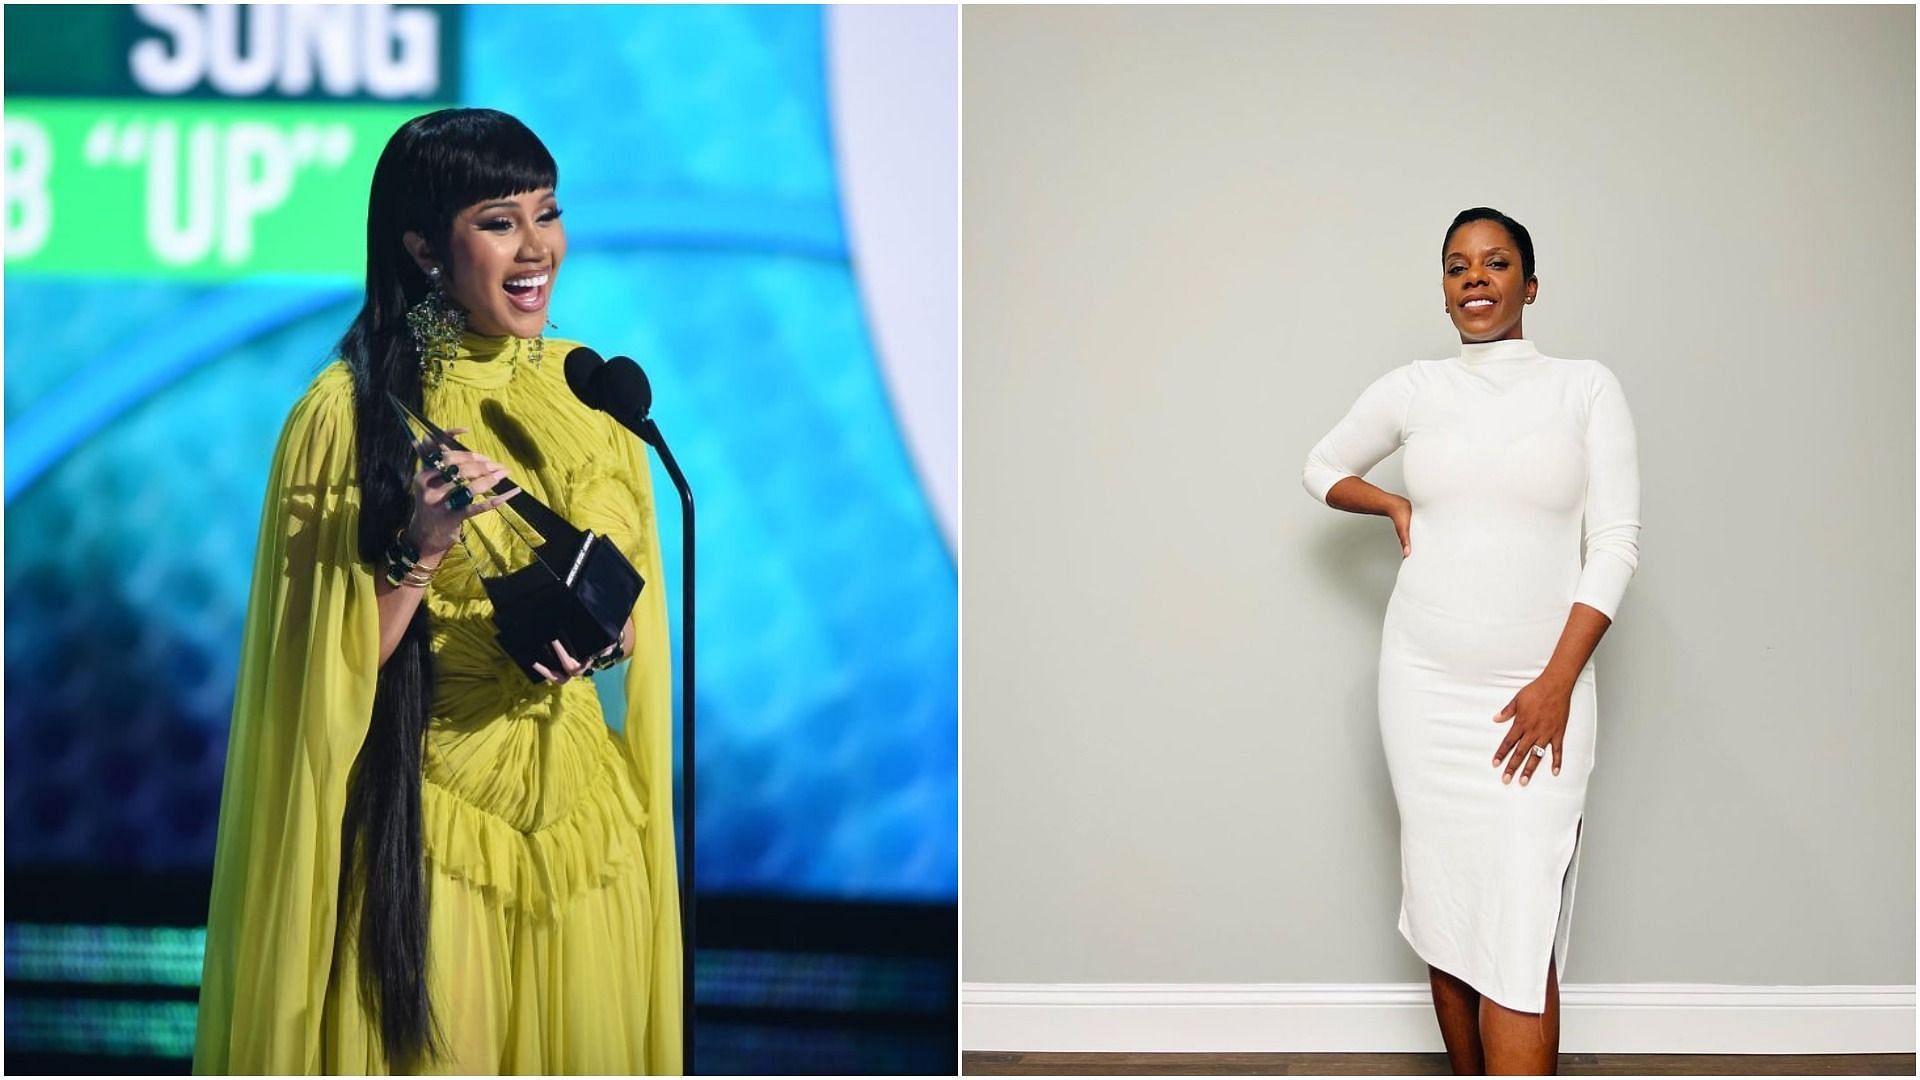 Cardi B filed a lawsuit against Tasha K accusing her for harassment (Images via ABC/Getty Images and unwinewithtashak/Instagram)